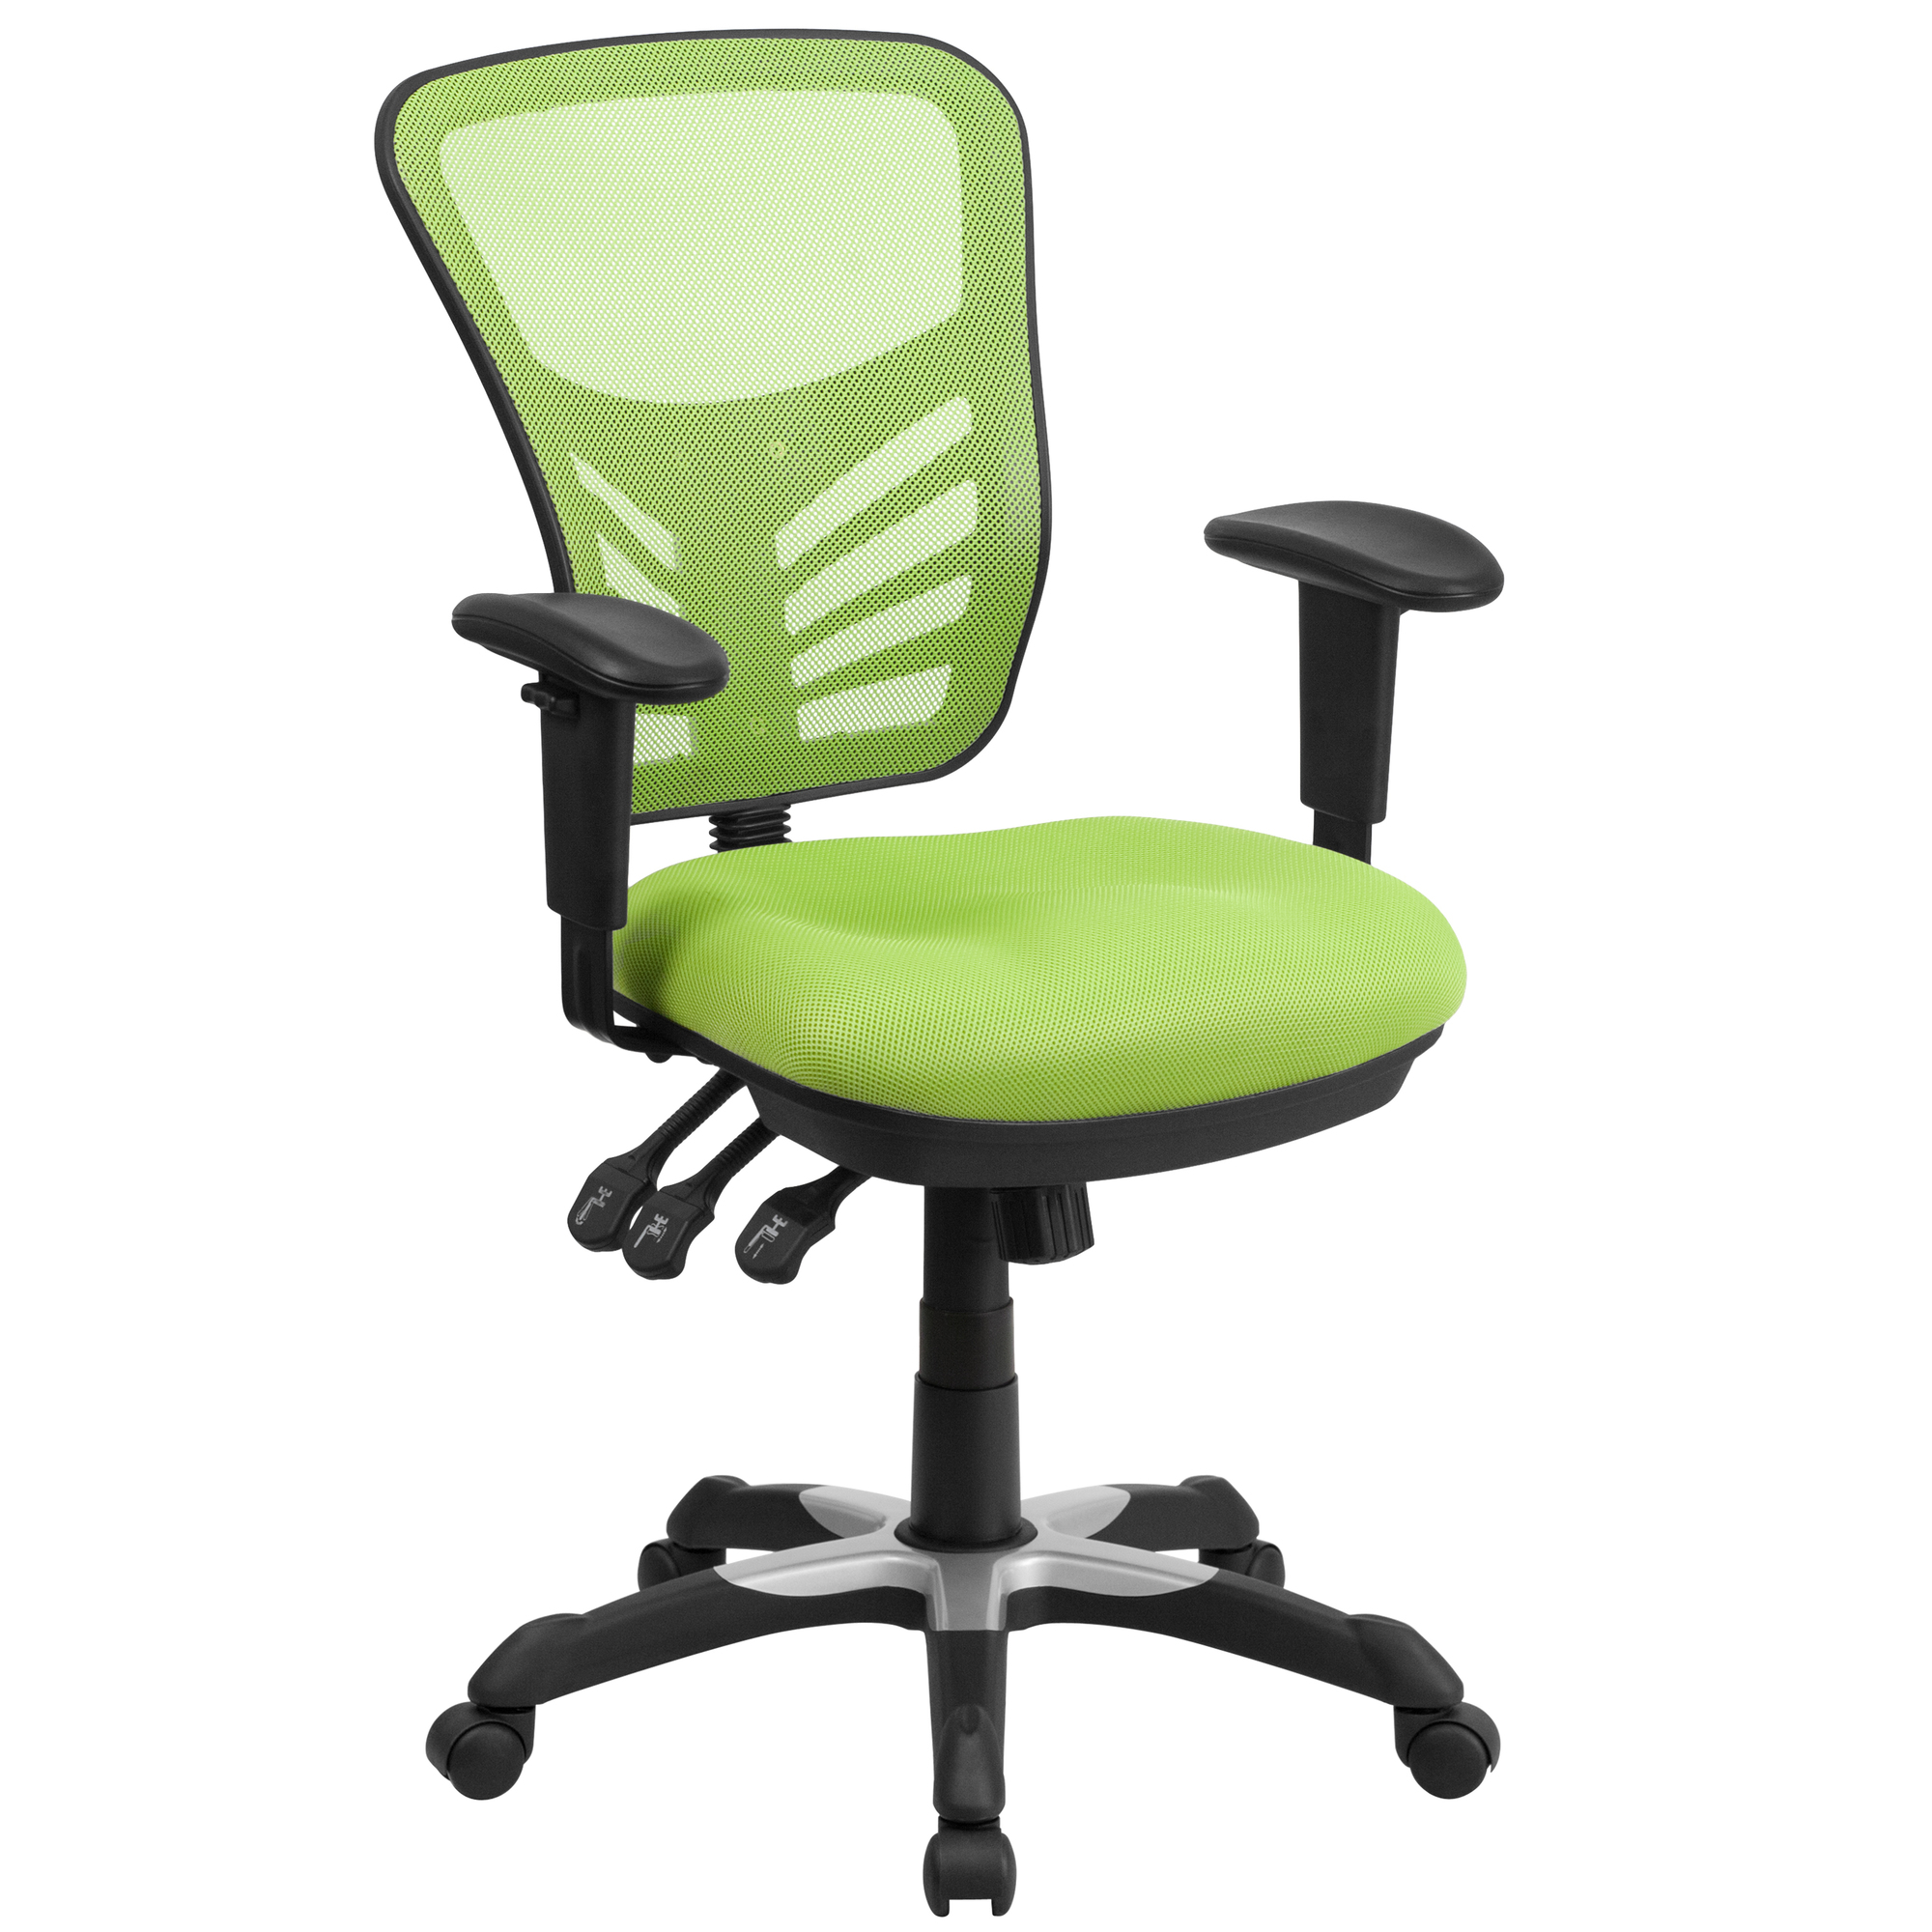 Mid-Back Green Mesh Multifunction Office Chair, Primary Color Green, Included (qty.) 1, Model - Flash Furniture HL0001GN